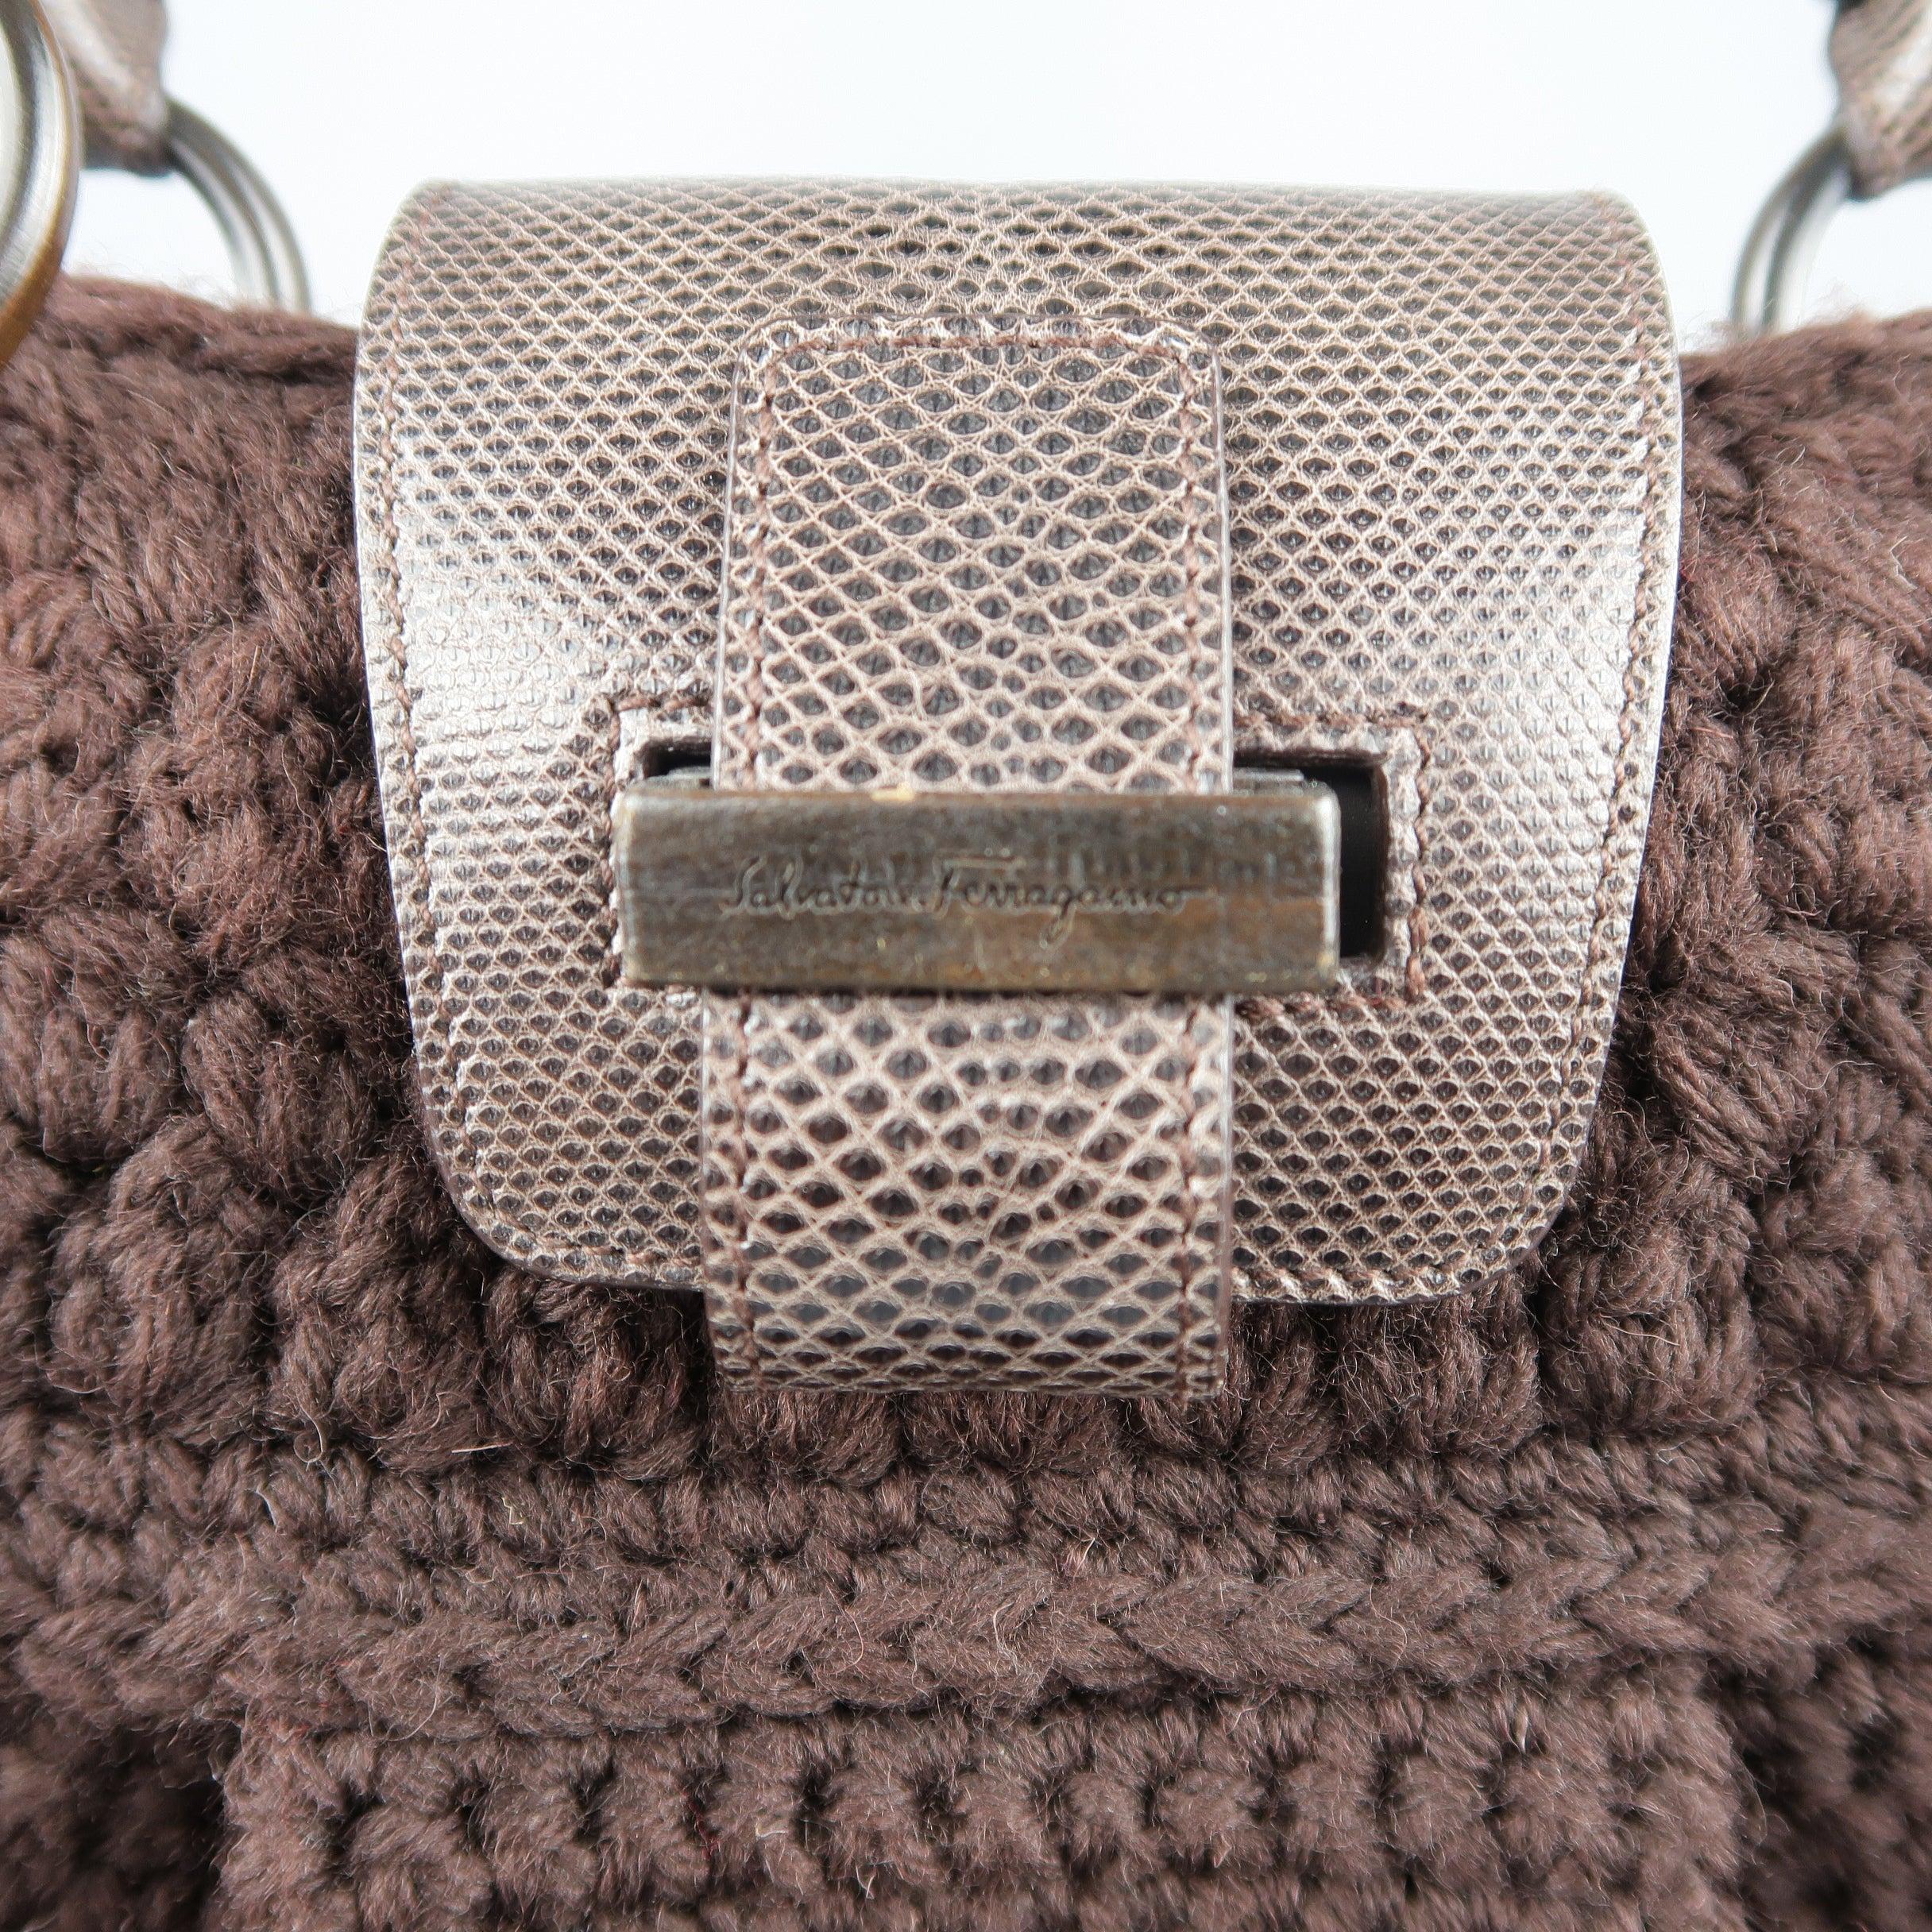 SALVATORE FERRAGAMO shoulder bag comes in a rich brown crochet knit with lizard textured leather details and features a pleated front, Gancini hardware side straps, buckle top closure, and double top handles. Minor wear.. Made in Italy.
Very Good